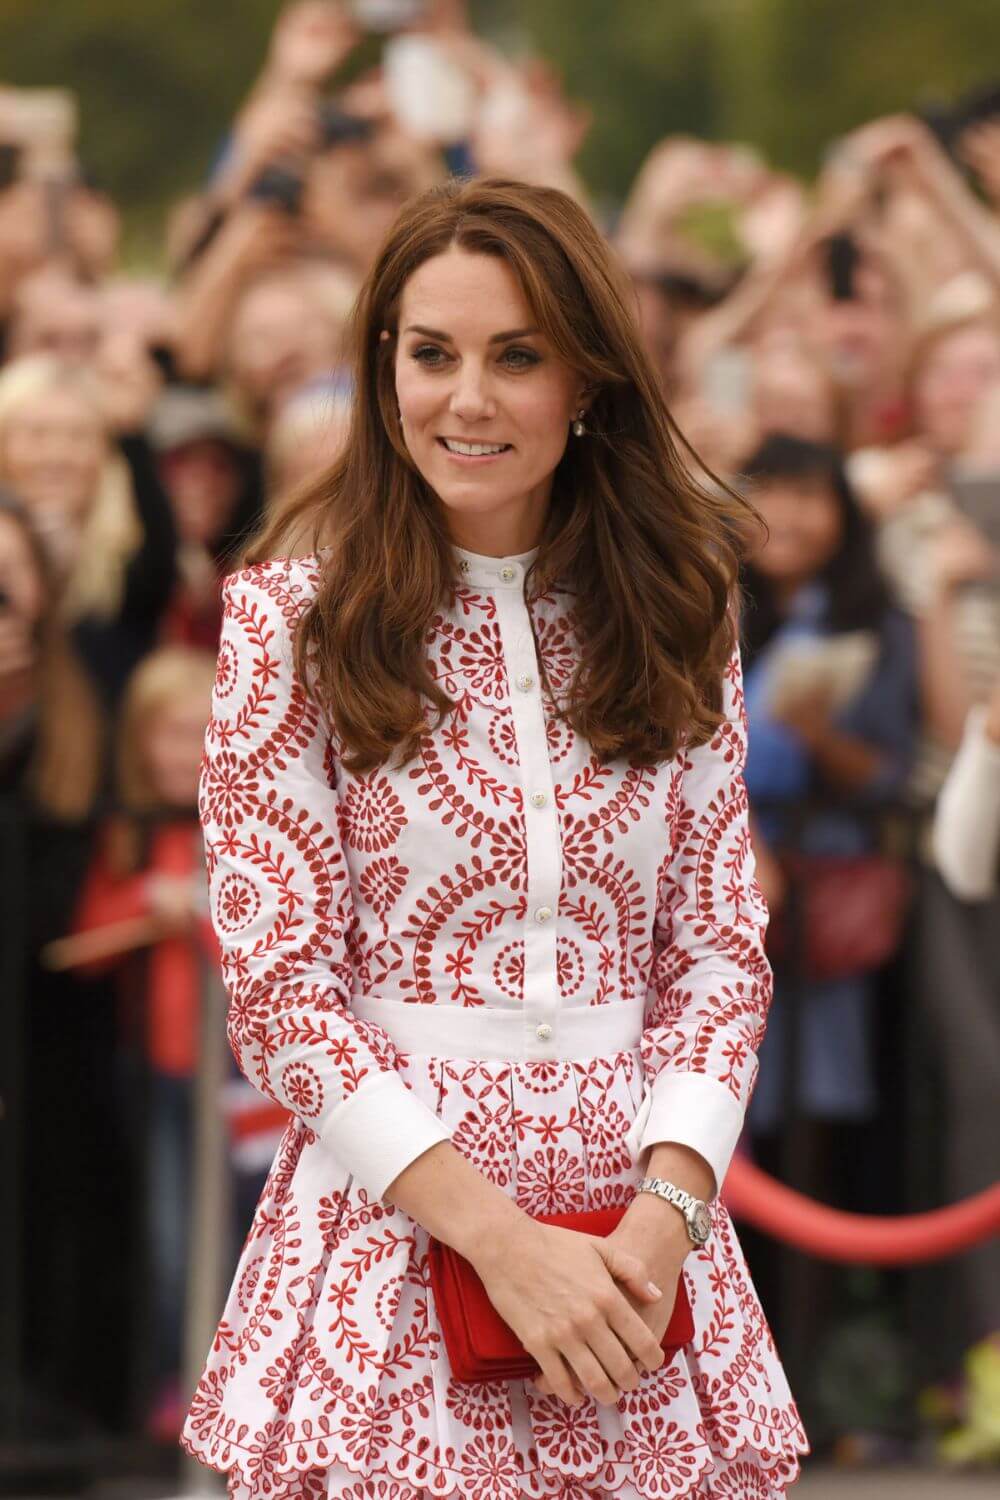 Kate Middleton pairing her Cartier watch with an elegant outfit